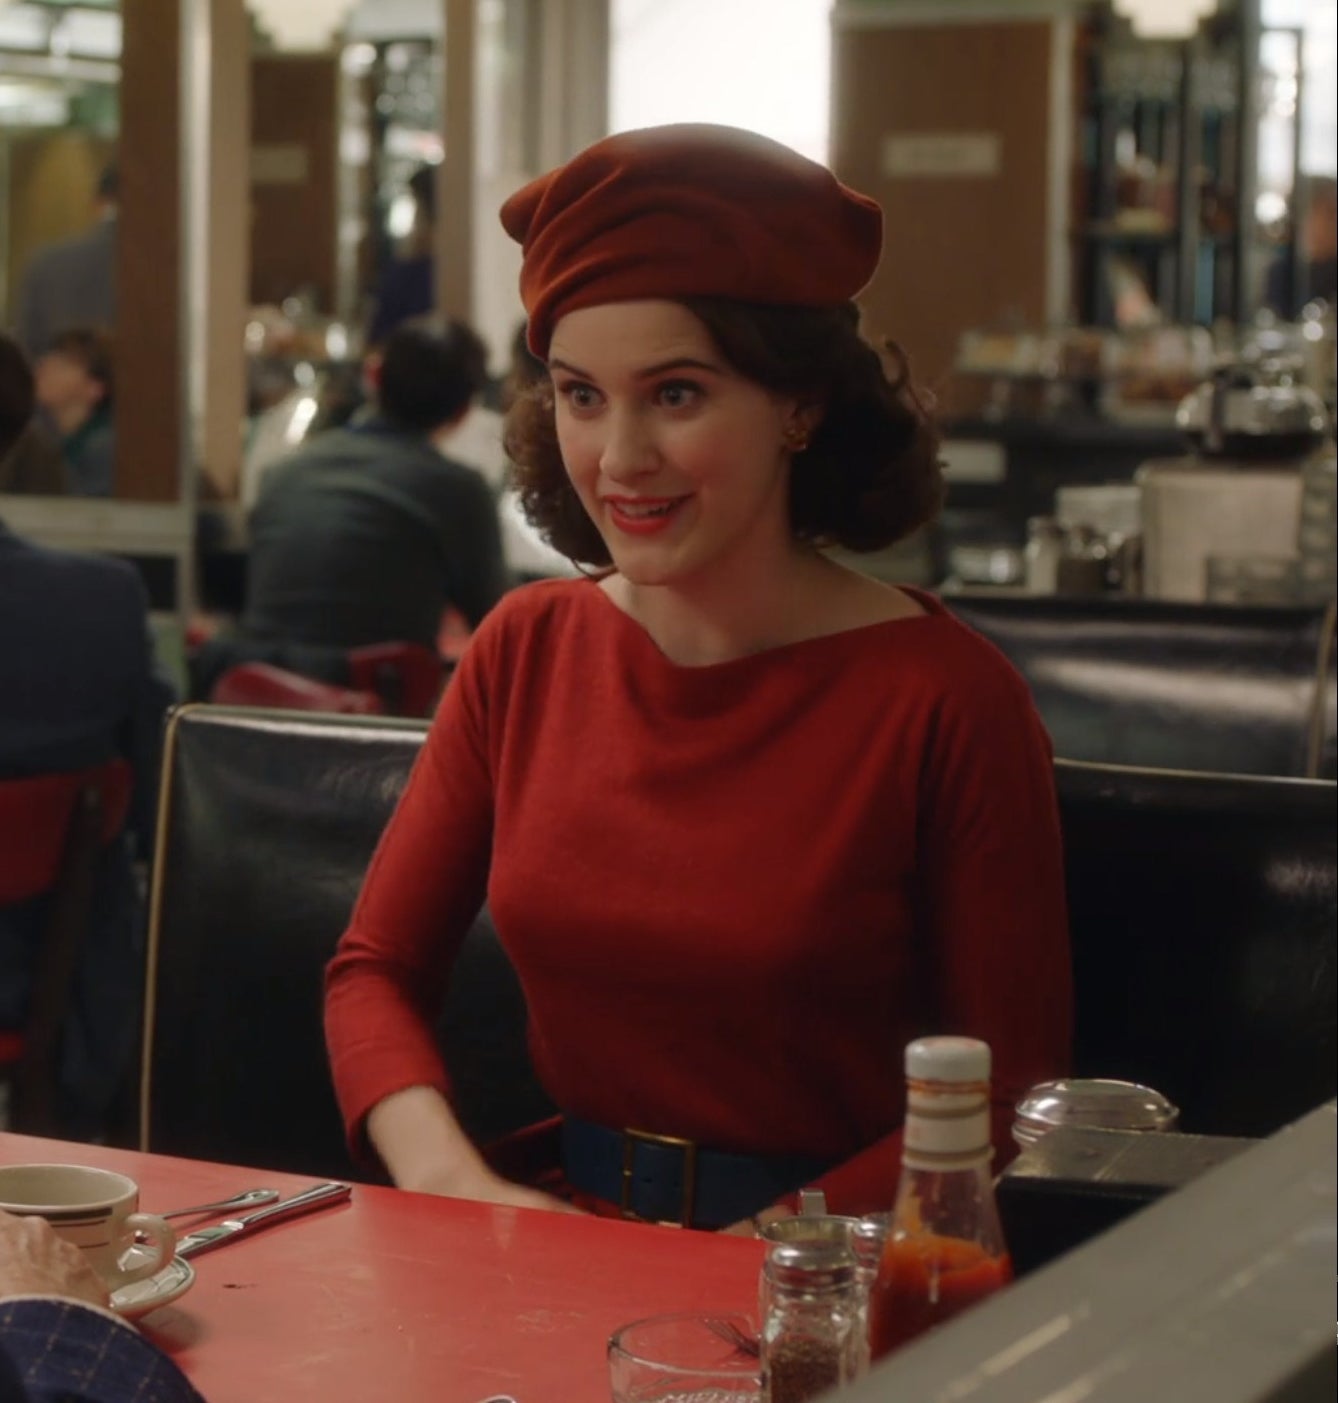 Screenshot from Mrs. Maisel shows Midge in a red dress sitting in a booth